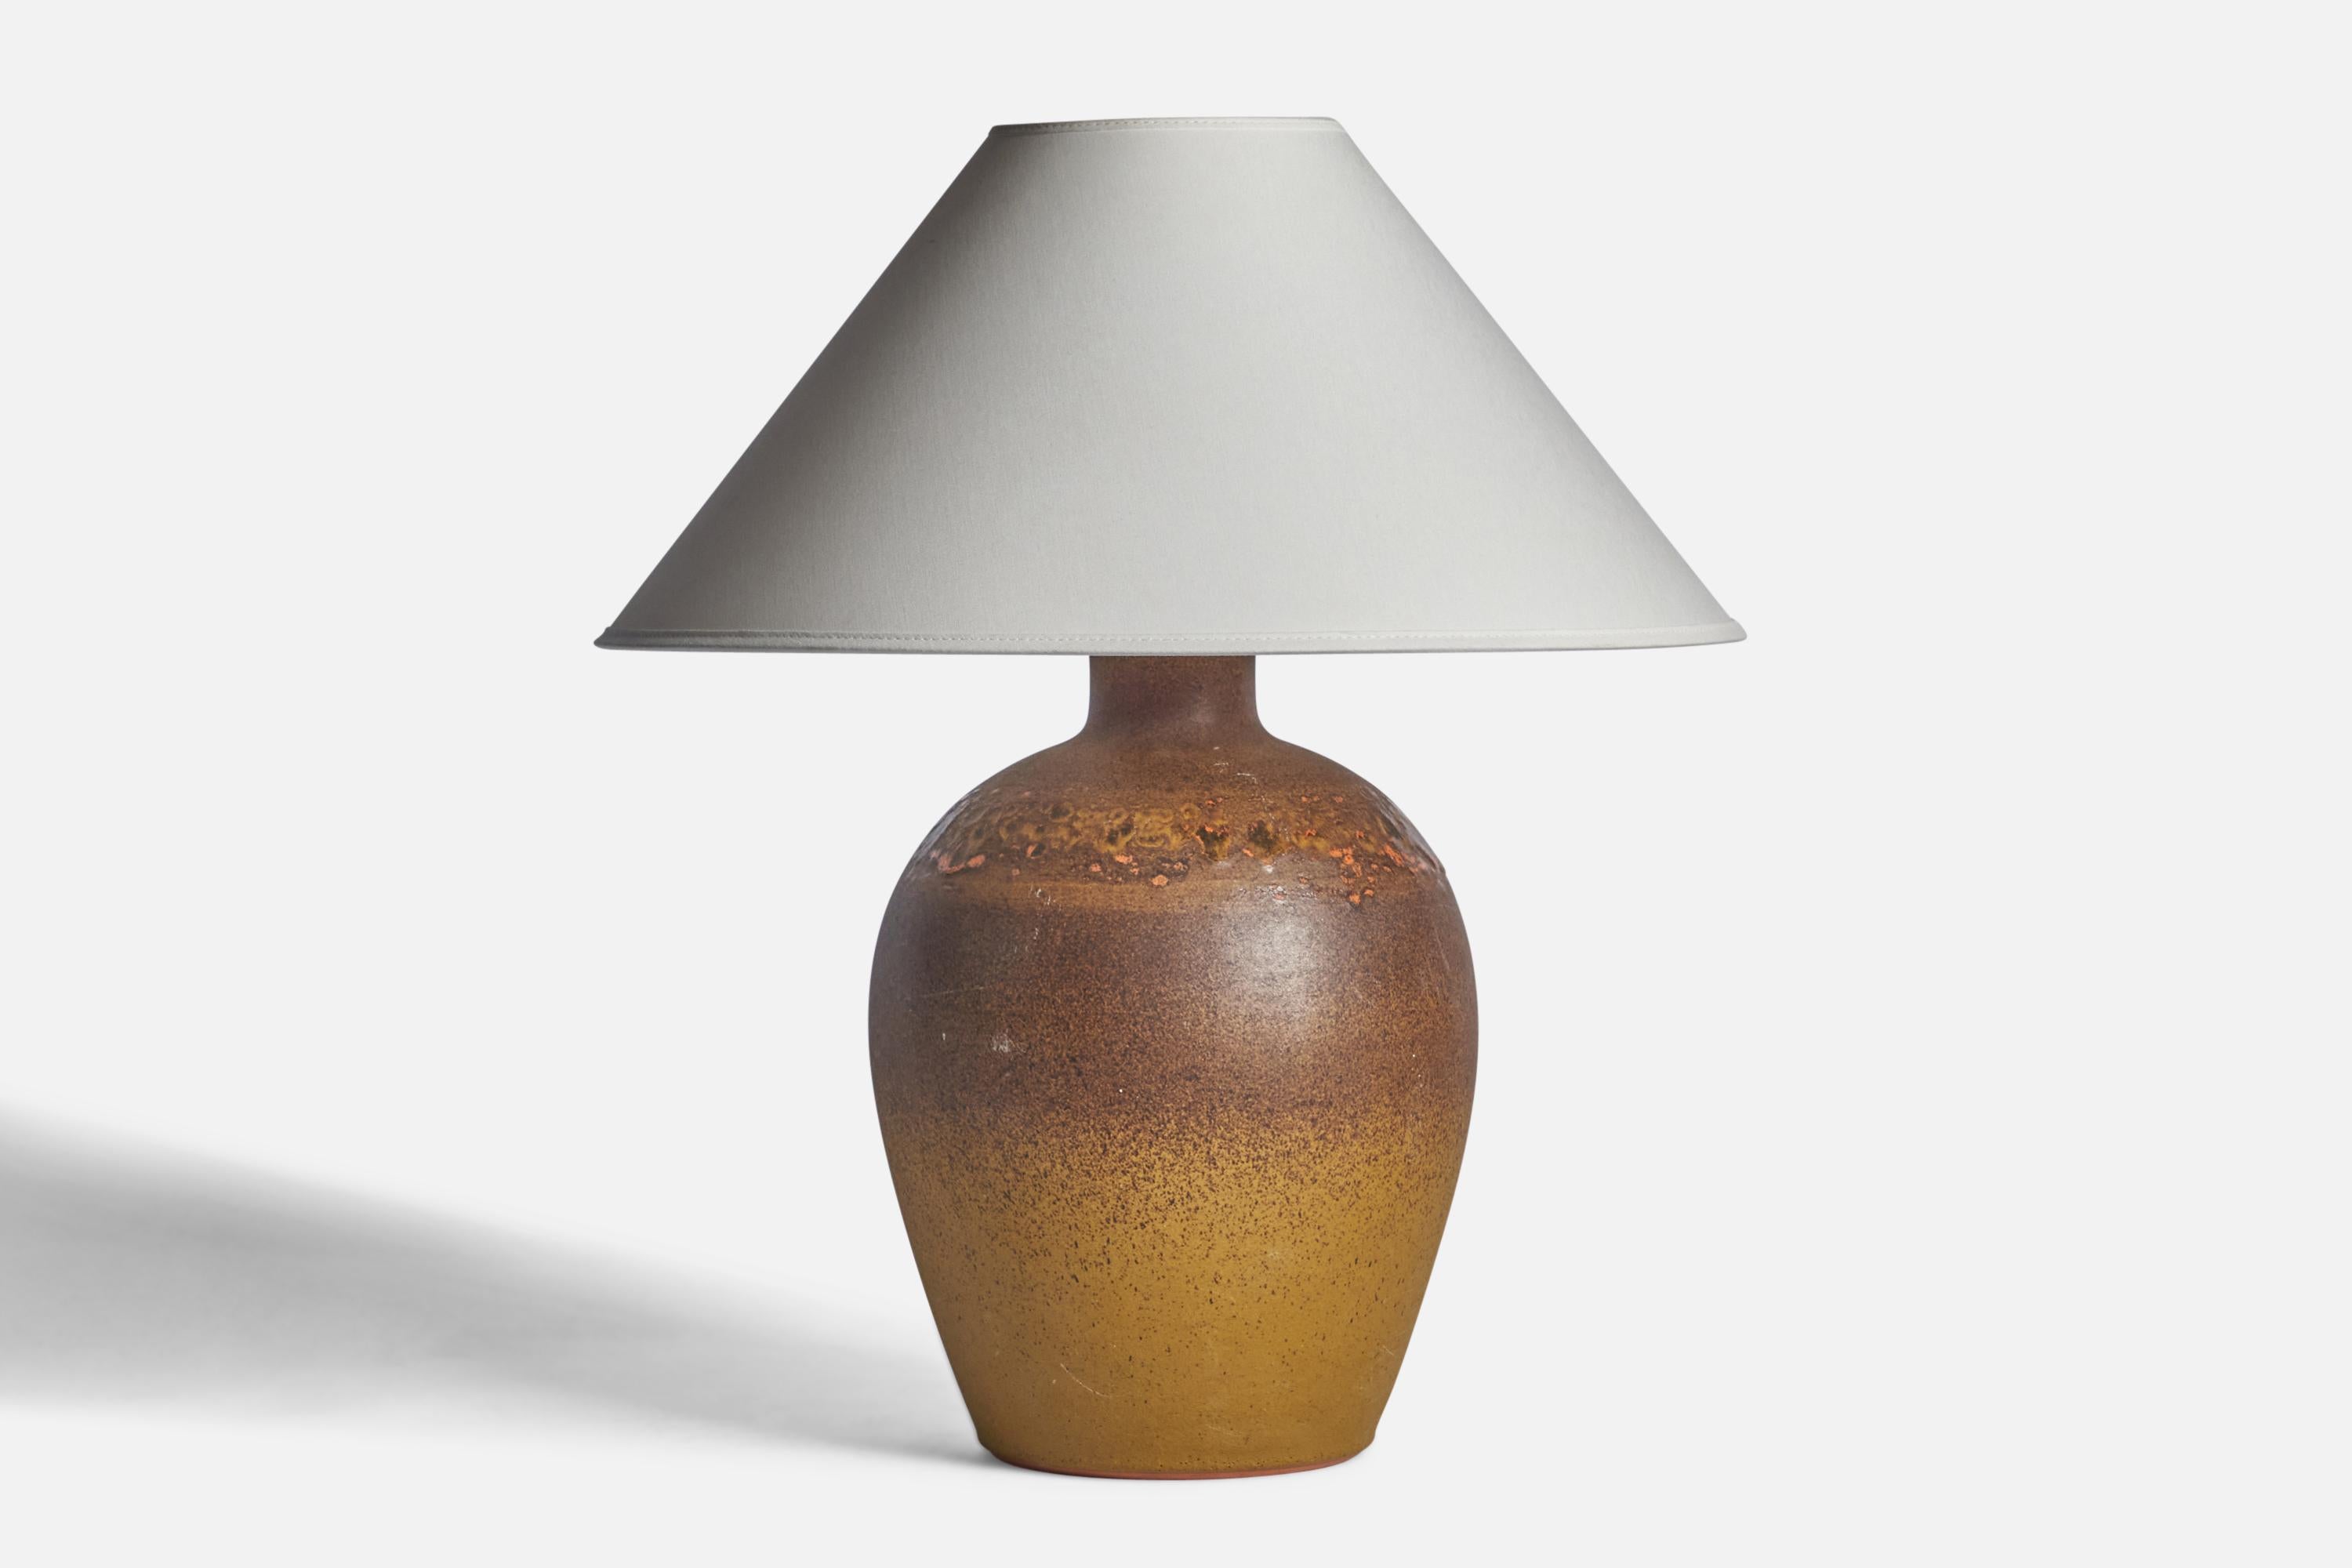 A brown and yellow-glazed stoneware table lamp designed and produced by Tilgmans Keramik, Sweden, 1960s.

Dimensions of Lamp (inches): 14.25” H x 8” Diameter
Dimensions of Shade (inches): 4.5” Top Diameter x 16” Bottom Diameter x 7.25” H
Dimensions